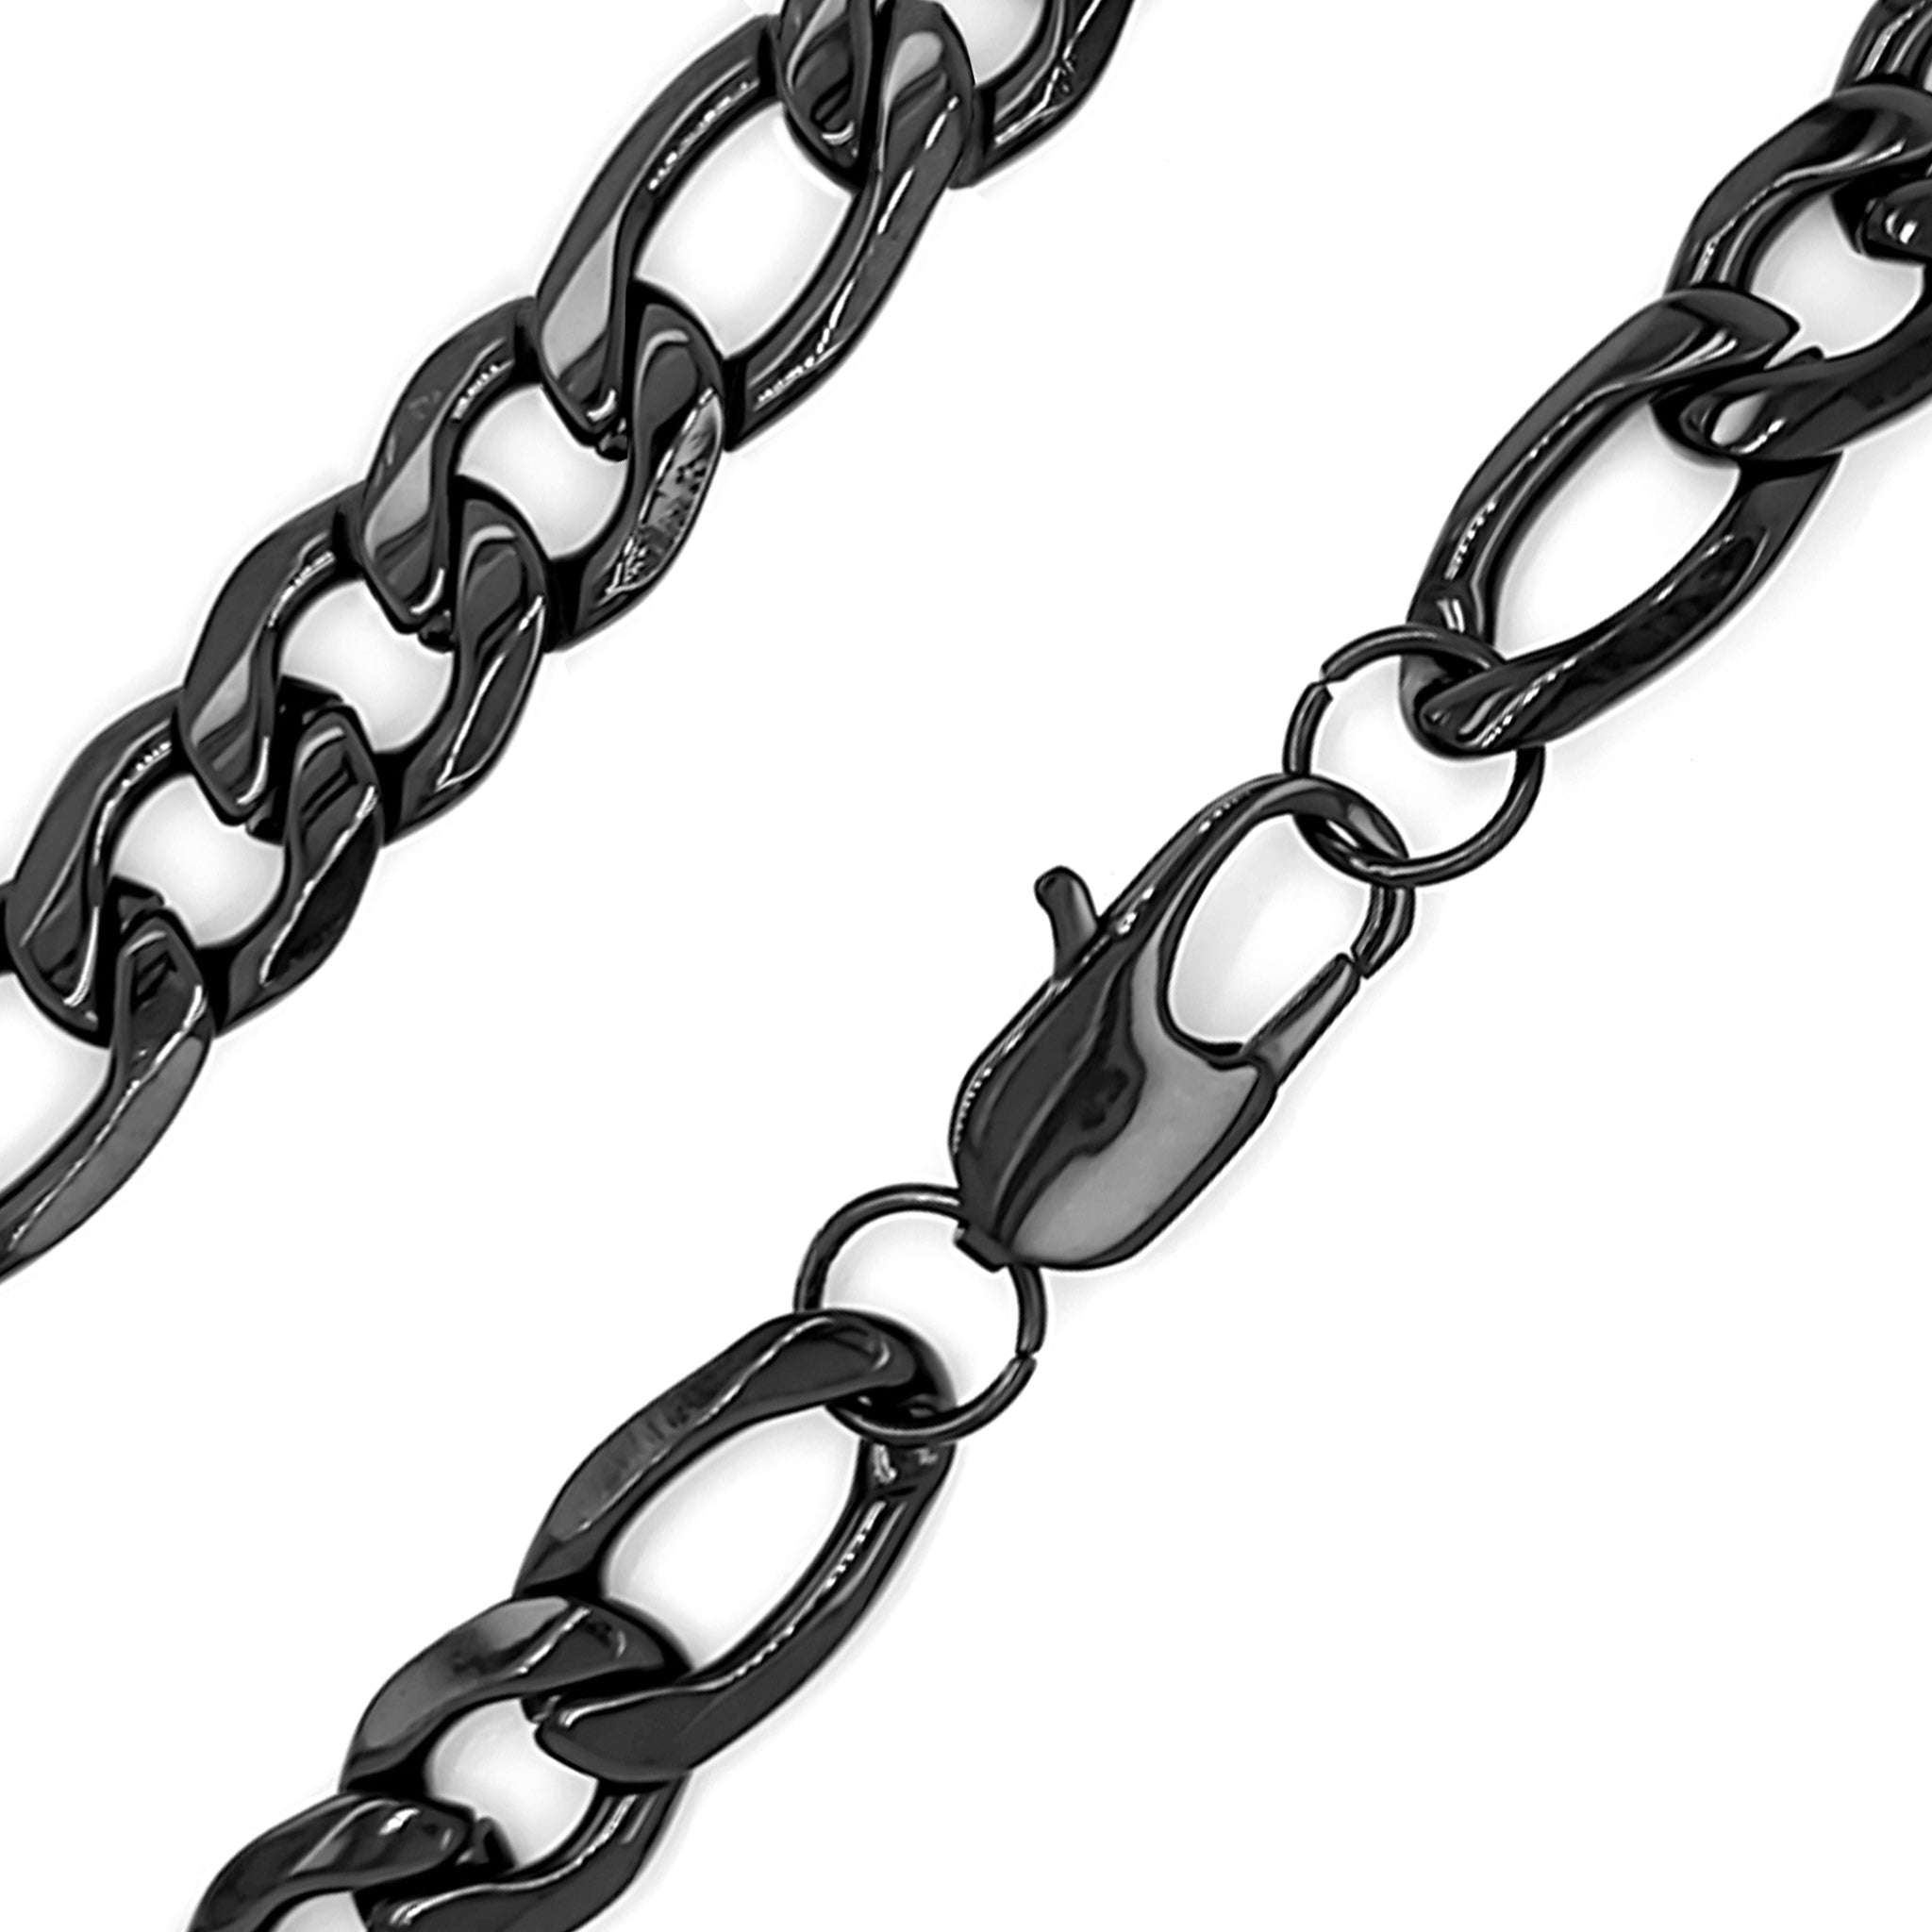 Men's Necklace Chain Stainless Steel, Black Stainless Steel Necklace Chain,  Box Chain Necklace, 6mm Black Chain Necklace 26 Inches